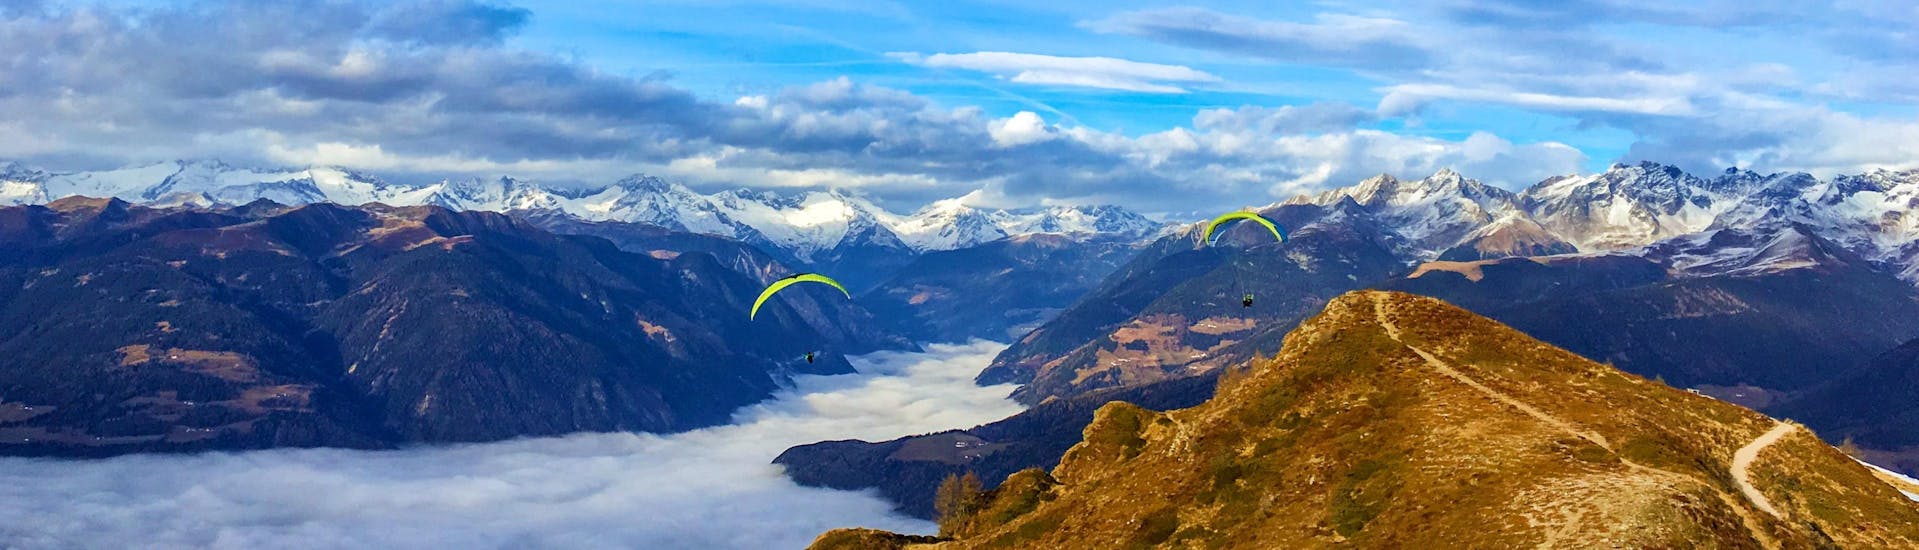 Two paragliders from Tandemflights Kronplatz are gliding over the beautiful mountain scenery around Plan de Corones and the Puster Valley.